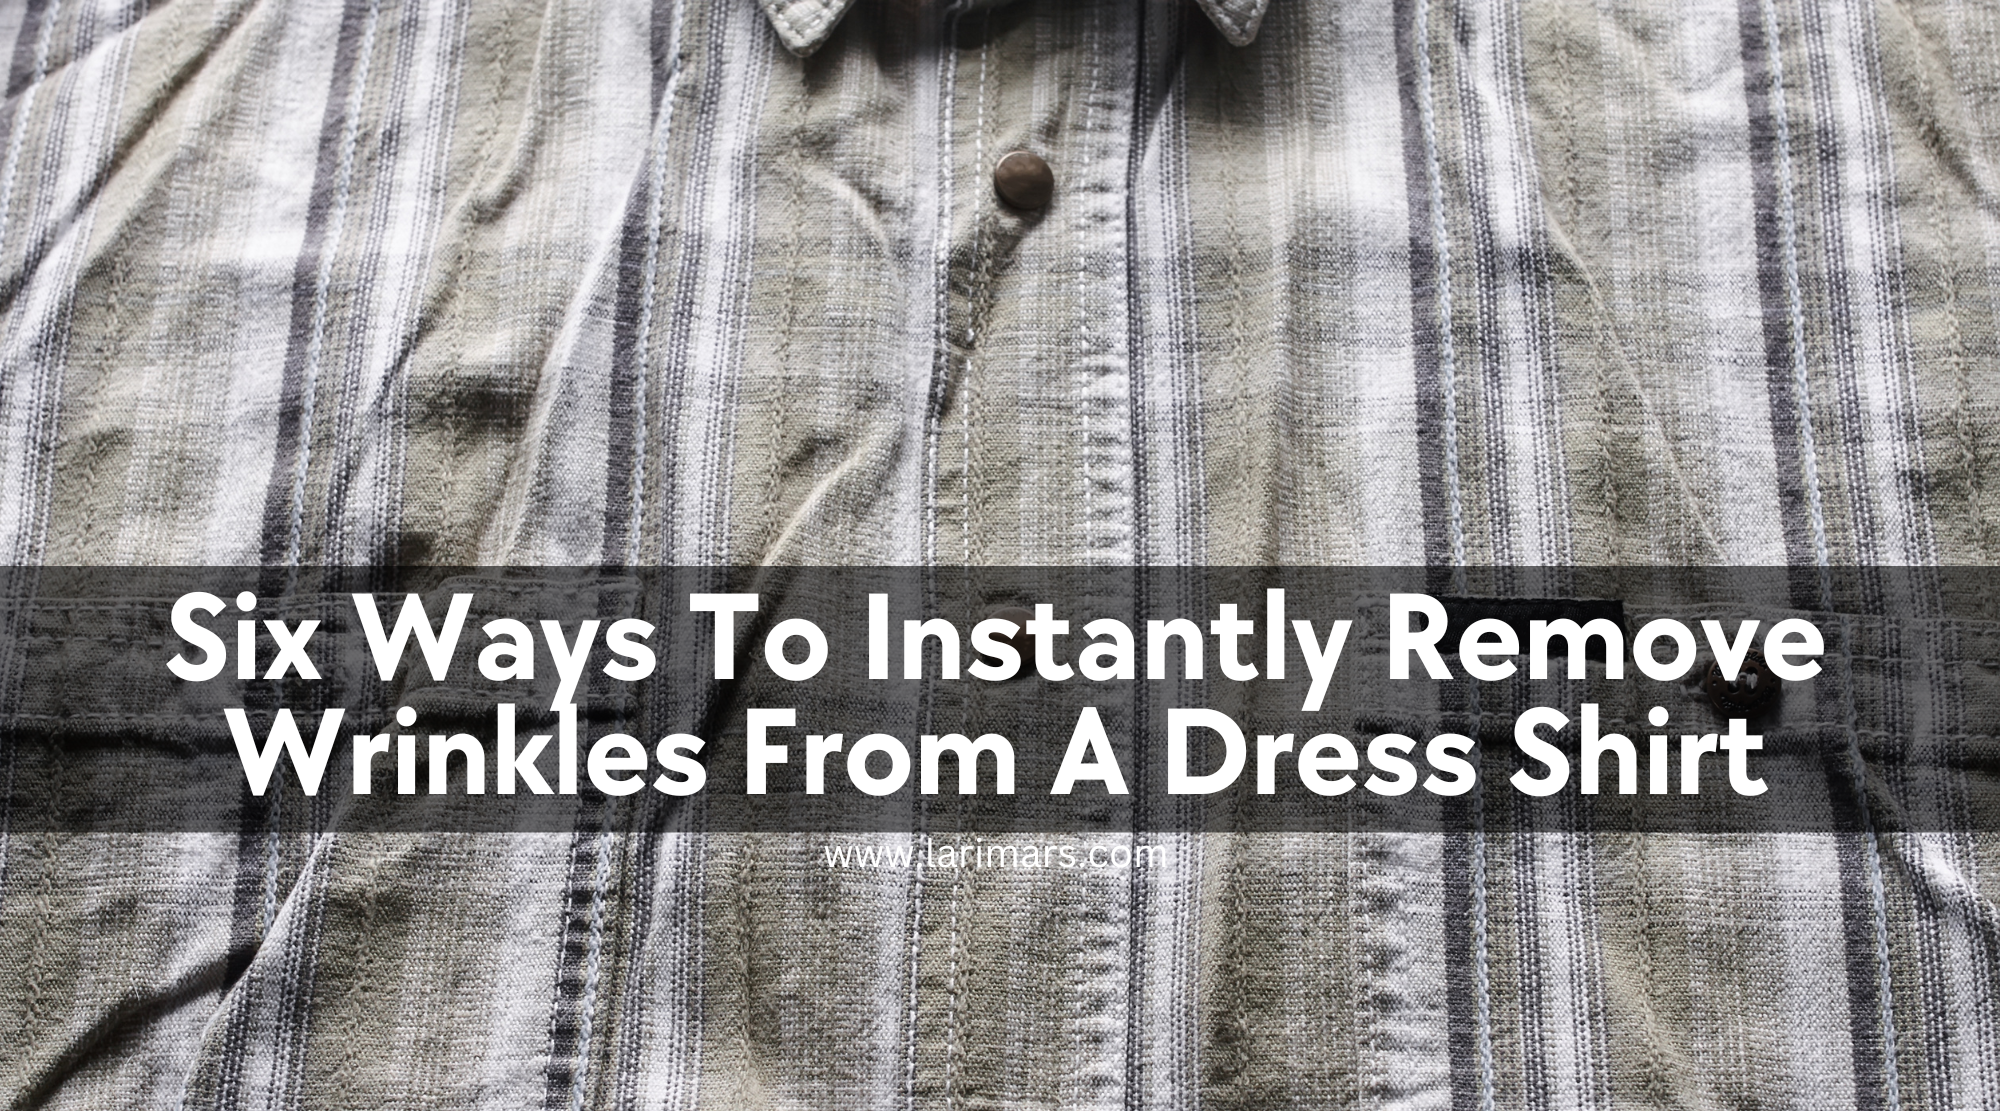 Six Ways To Instantly Remove Wrinkles From A Dress Shirt